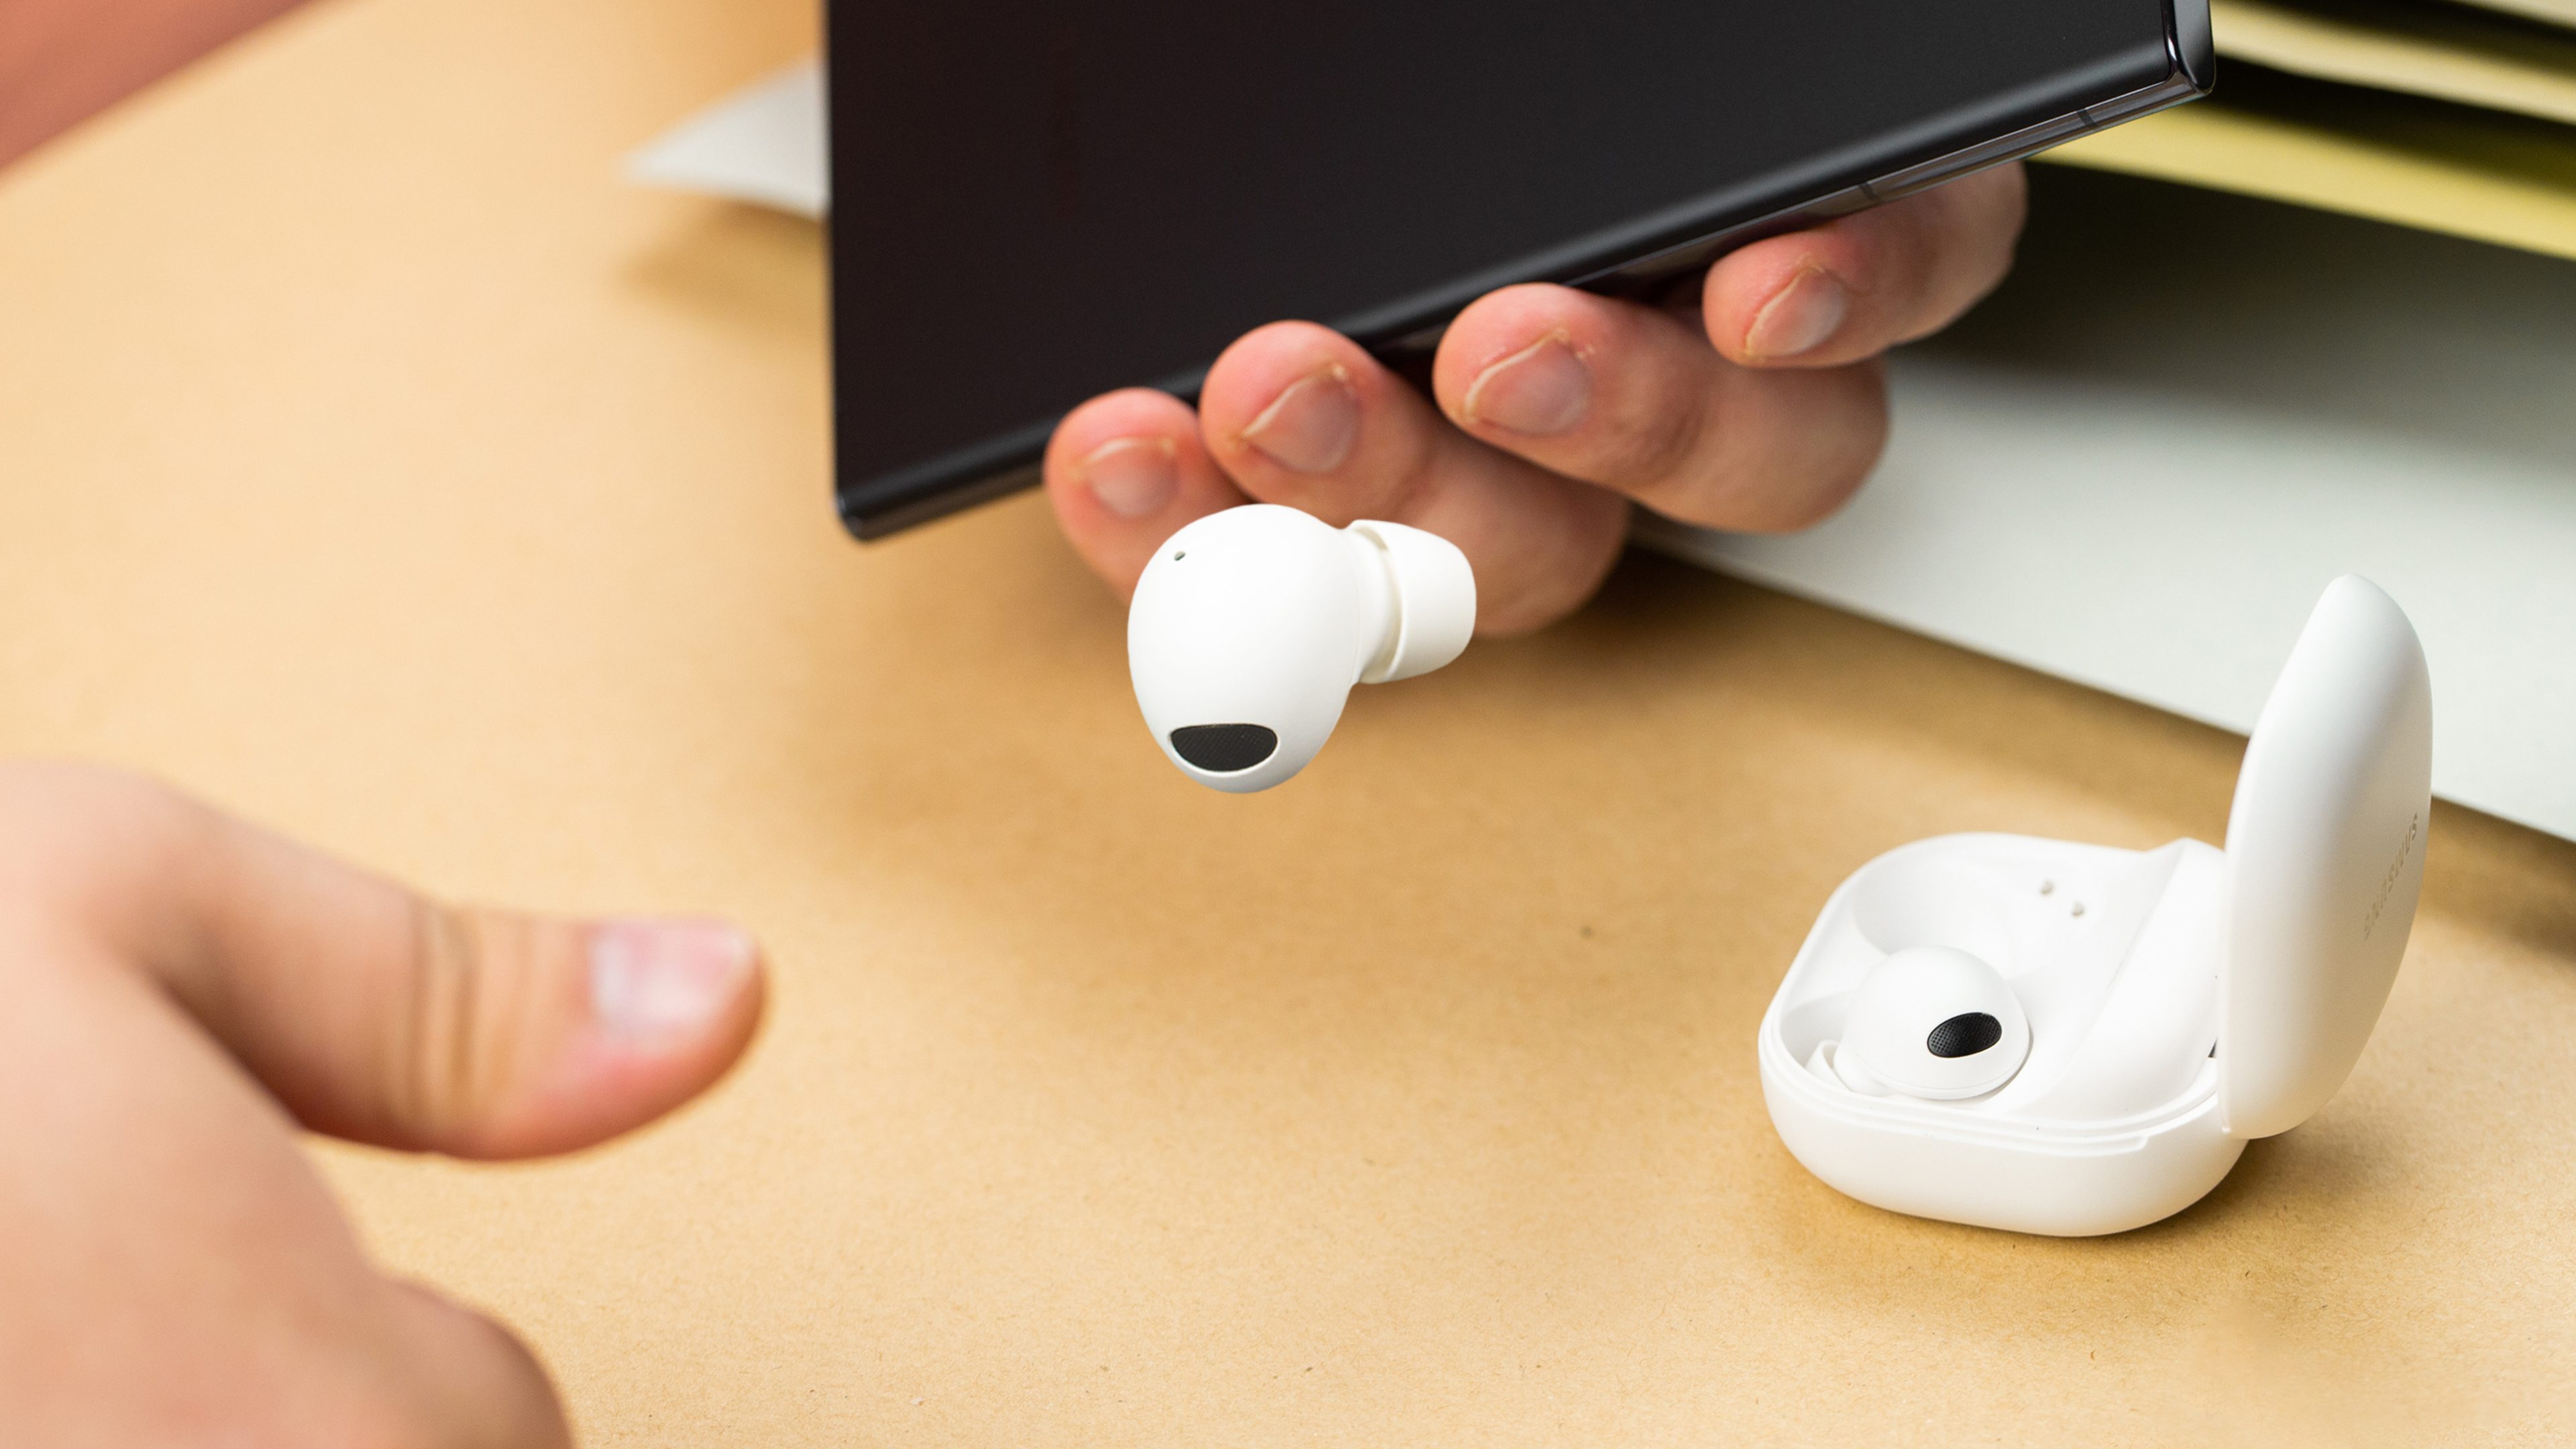 Samsung Galaxy Buds 2 review: More affordable noise cancelling